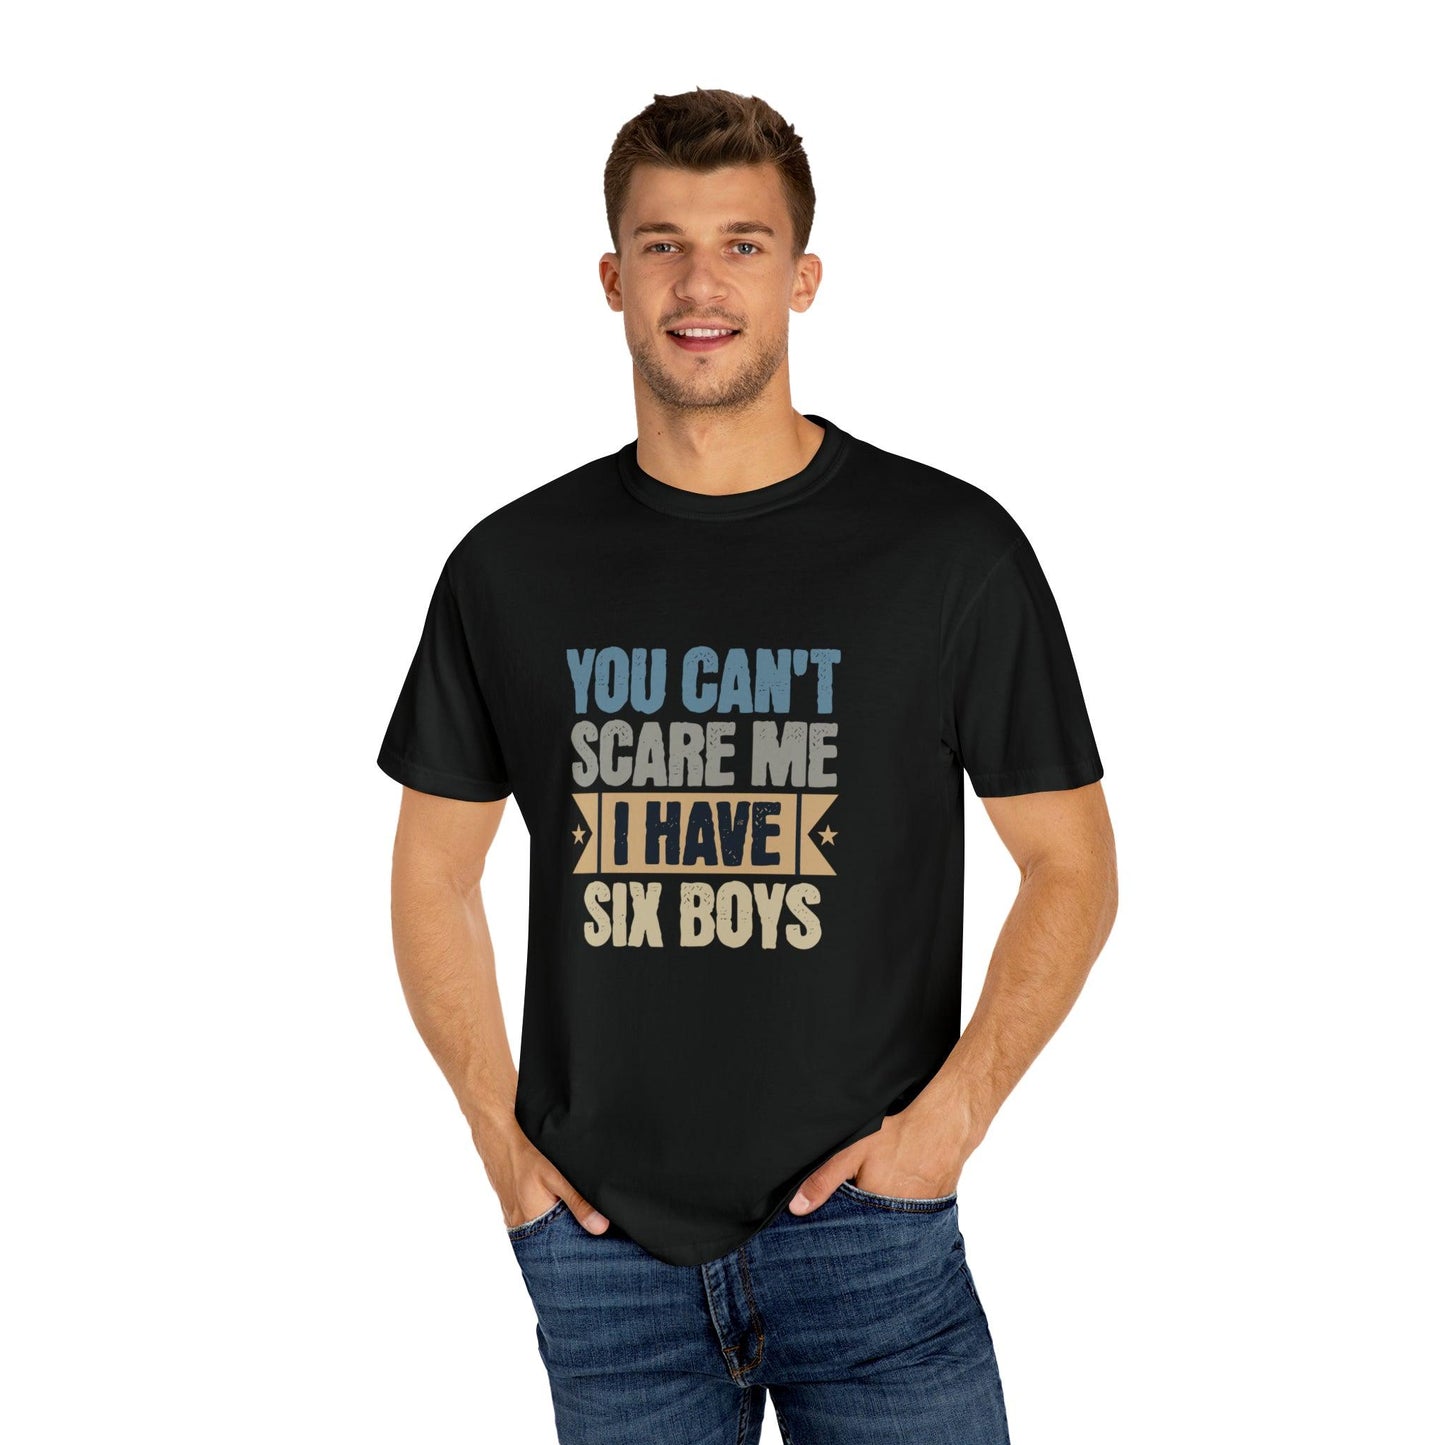 You Can't Scare Me, I Have 6 Boys: Proud Mama T-Shirt - Pandaize